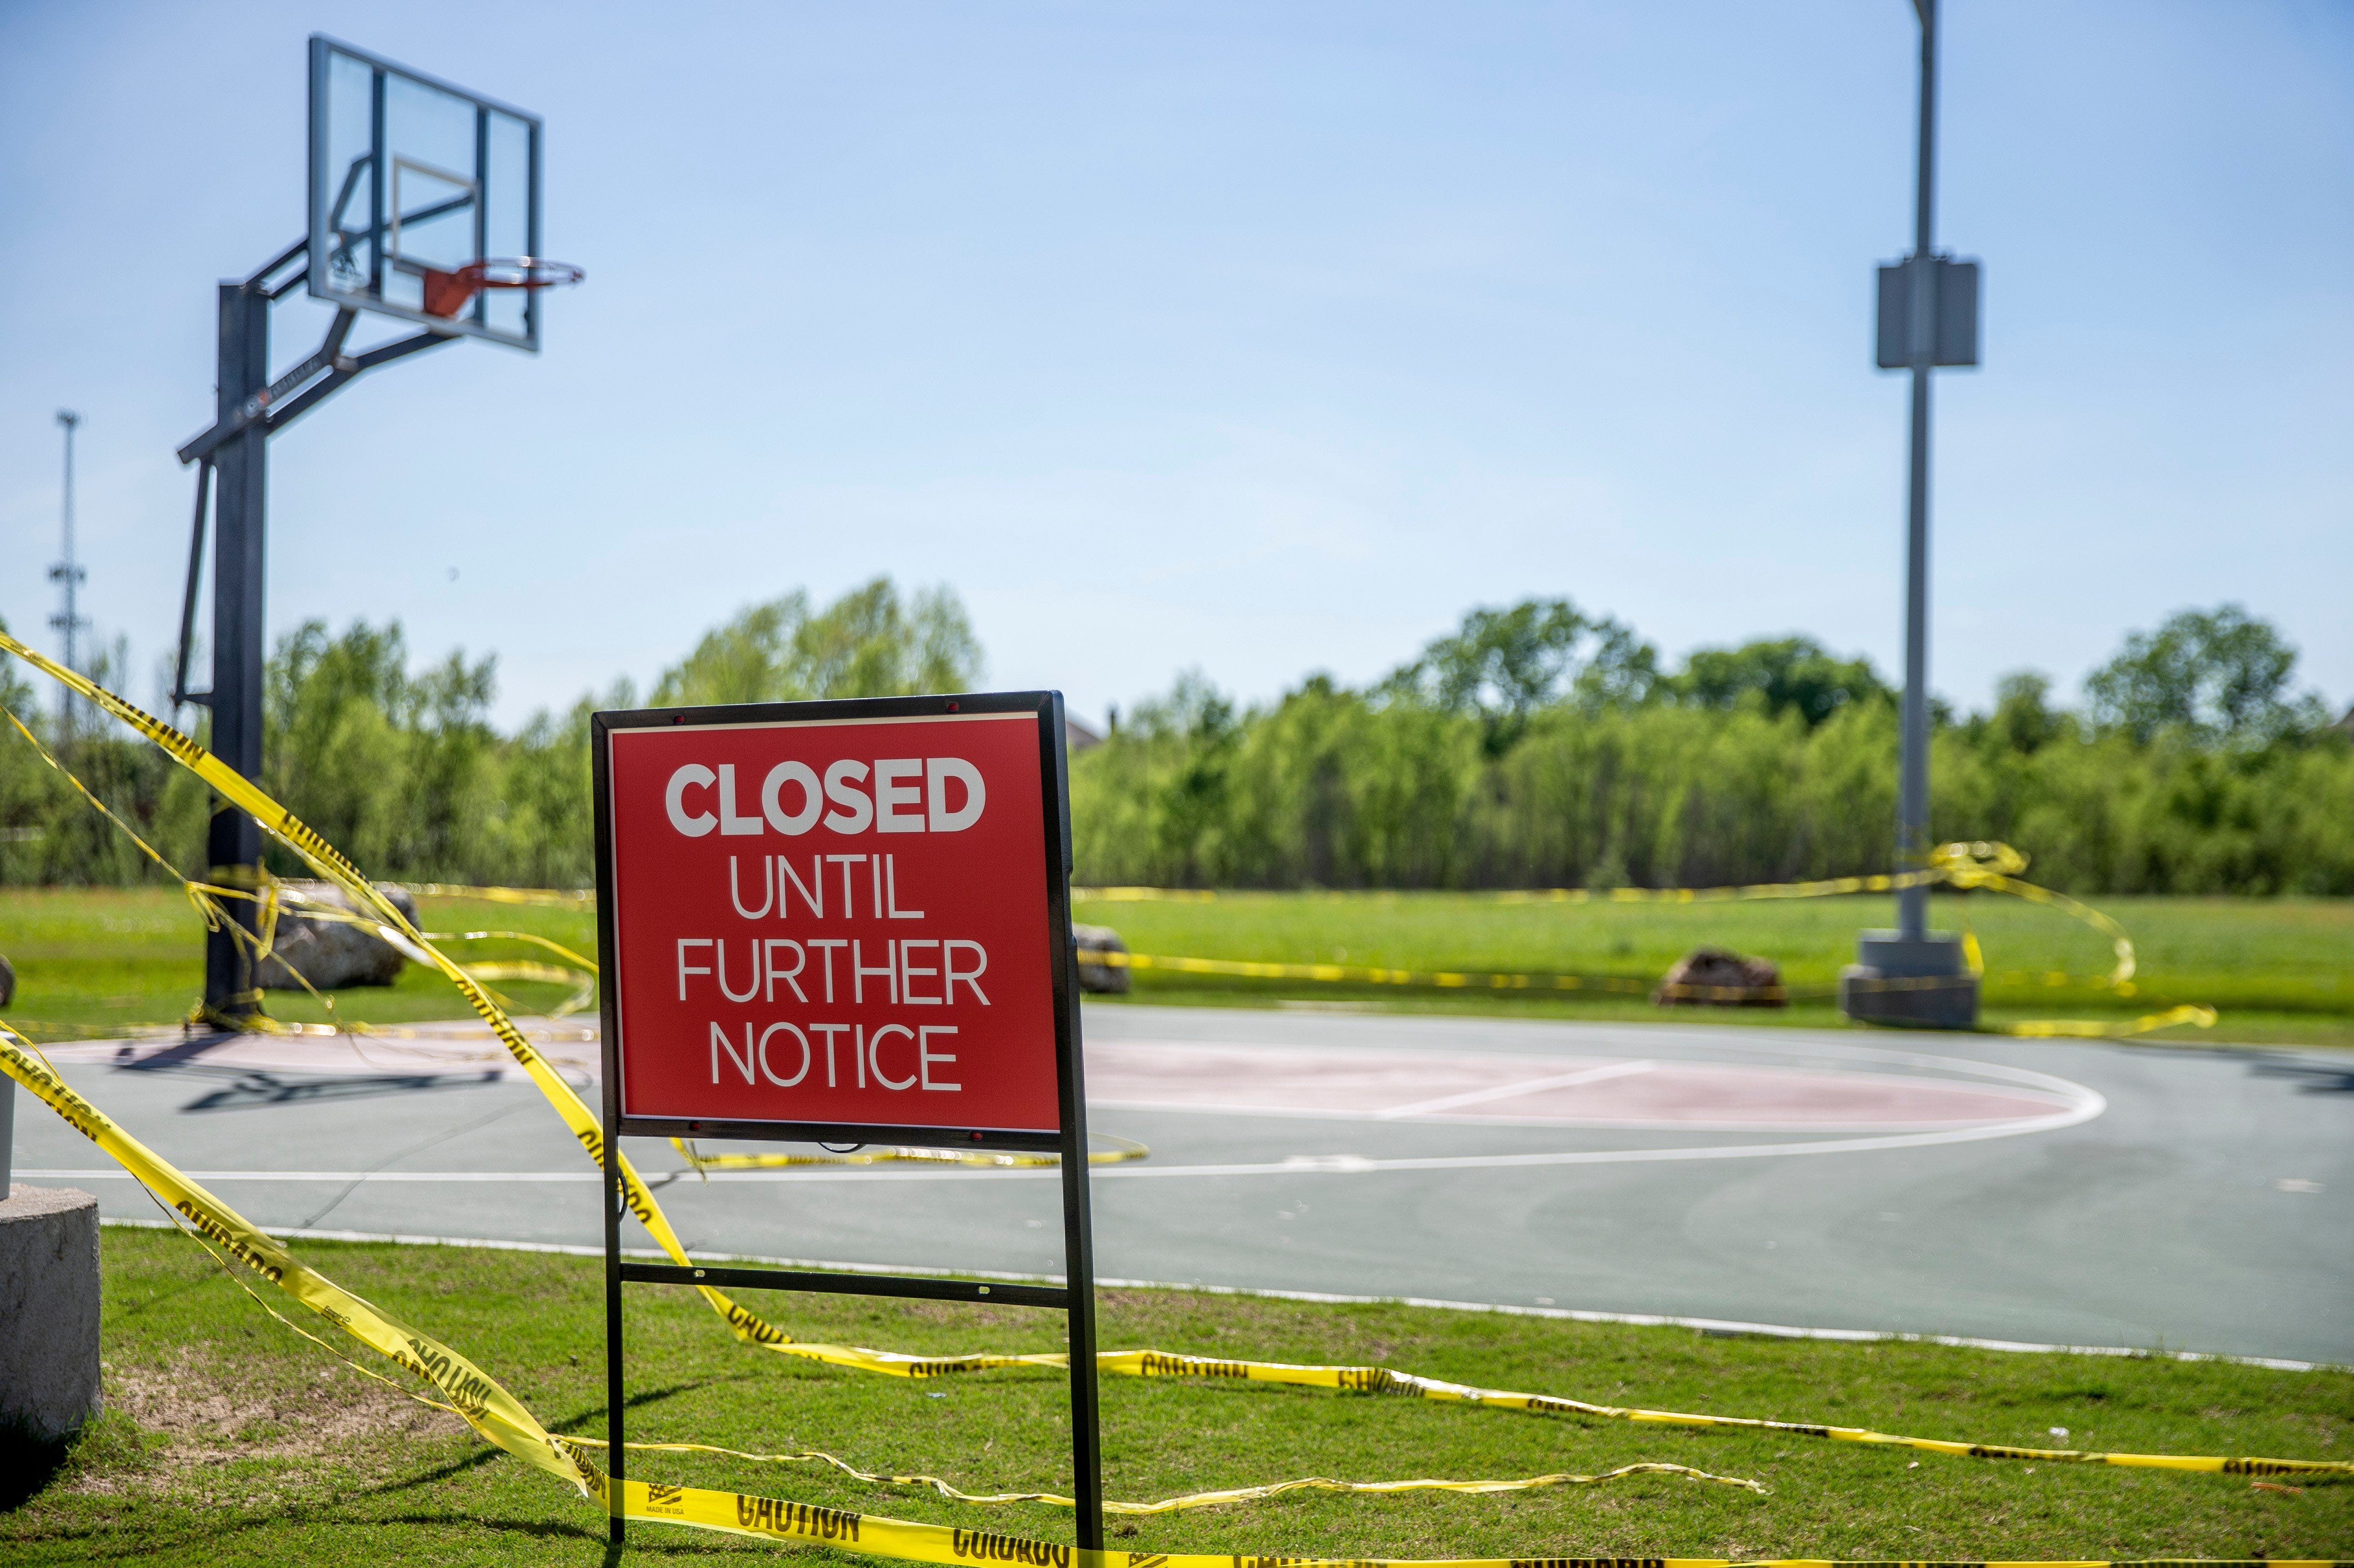 An Avalon Rinderknecht Park in Pflugerville has closed  as  part of the effort to slow down or stop the spread of the coronavirus. Most basket ball courts in Central Texas have closed due to the Coronavirus also known as Covid-19  Wednesday, April 1, 2020.